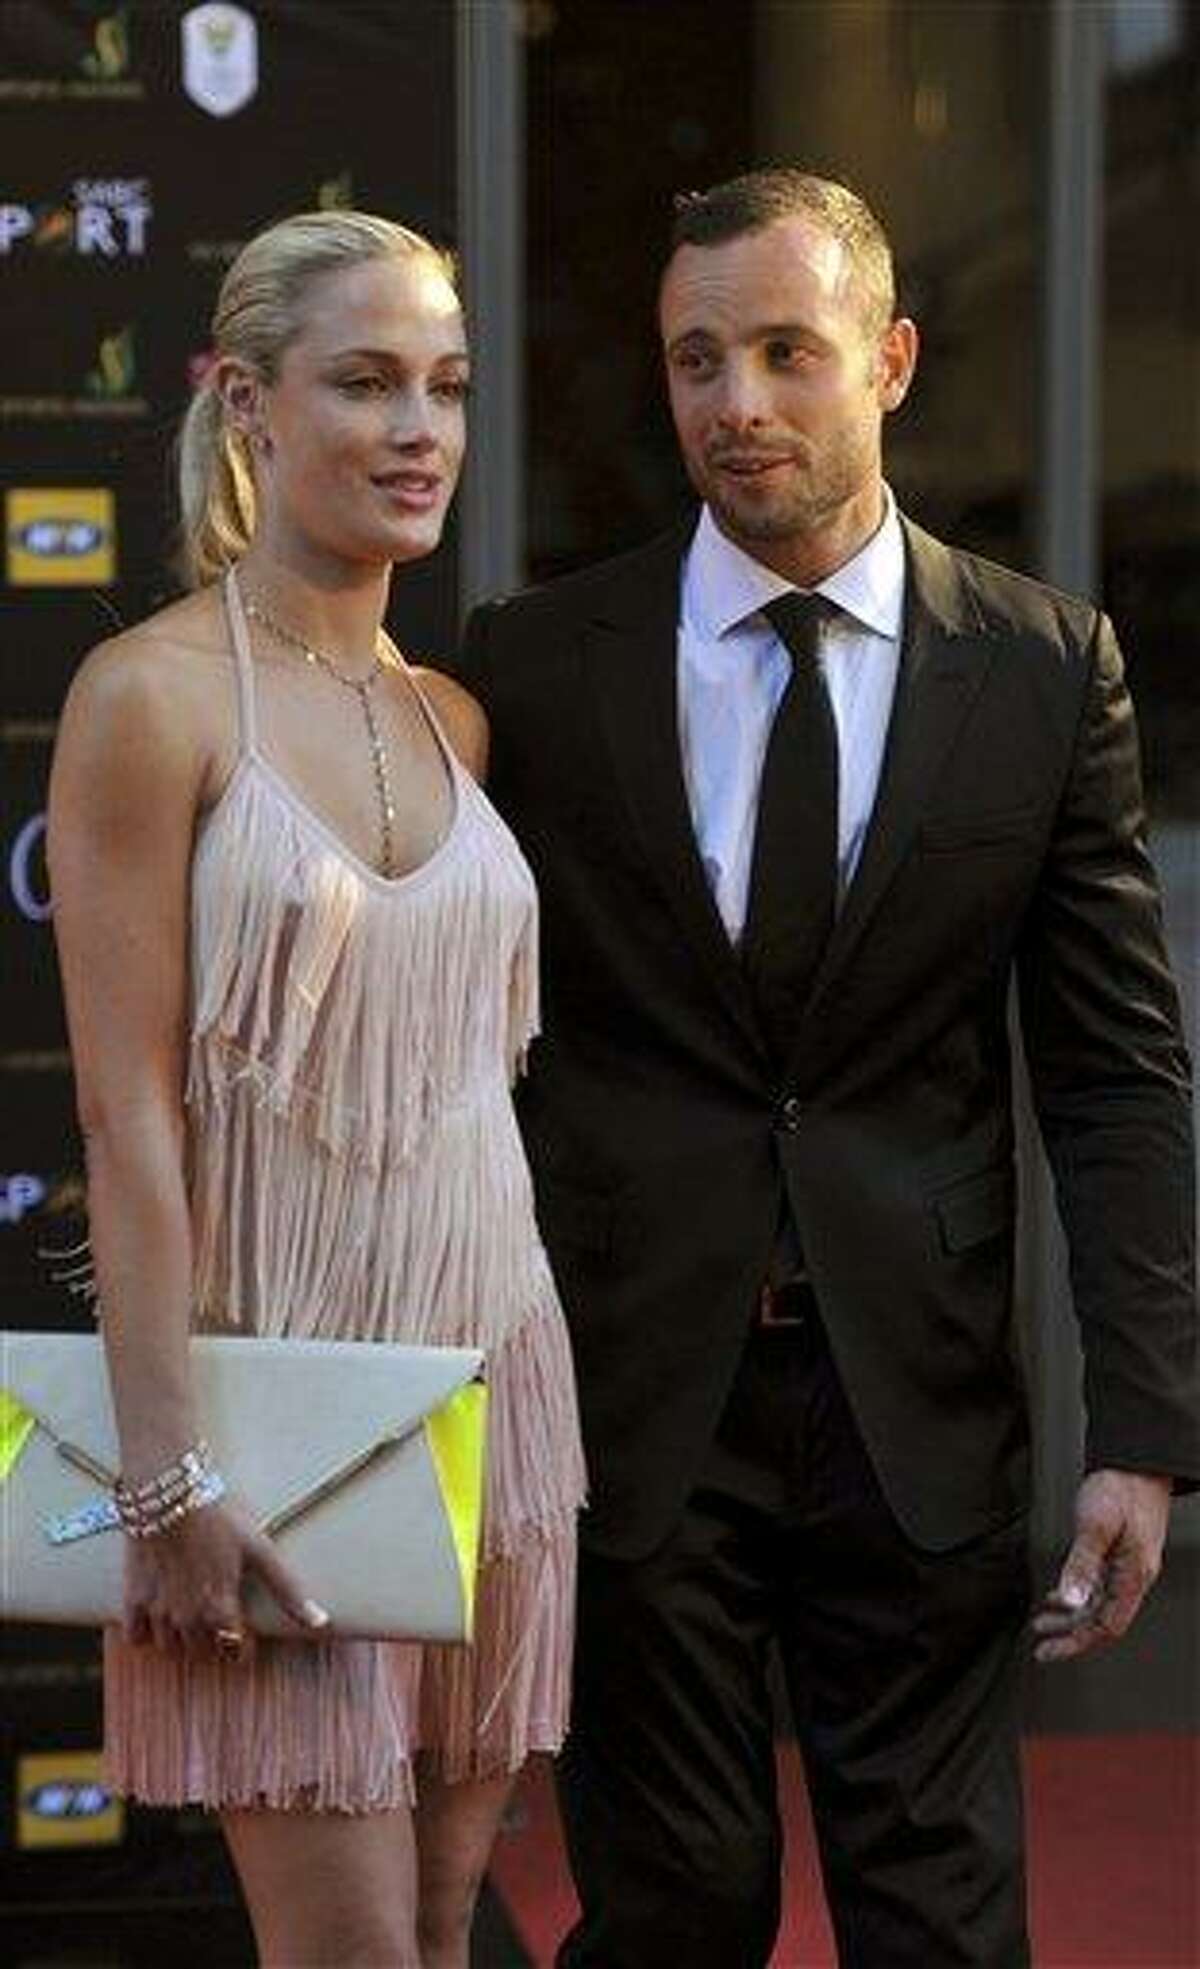 In this Nov. 4, 2012 photo, South African Olympic athlete Oscar Pistorius and Reeva Steenkamp, believed to be his girlfriend, at an awards ceremony, in Johannesburg, South Africa. Olympic athlete Oscar Pistorius was taken into custody and was expected to appear in court Thursday, Feb. 14, 2013, after a 30-year-old woman who was believed to be his girlfriend was shot dead at his home in South Africa's capital, Pretoria. (AP Photo/Lucky Nxumalo-Citypress) SOUTH AFRICA OUT